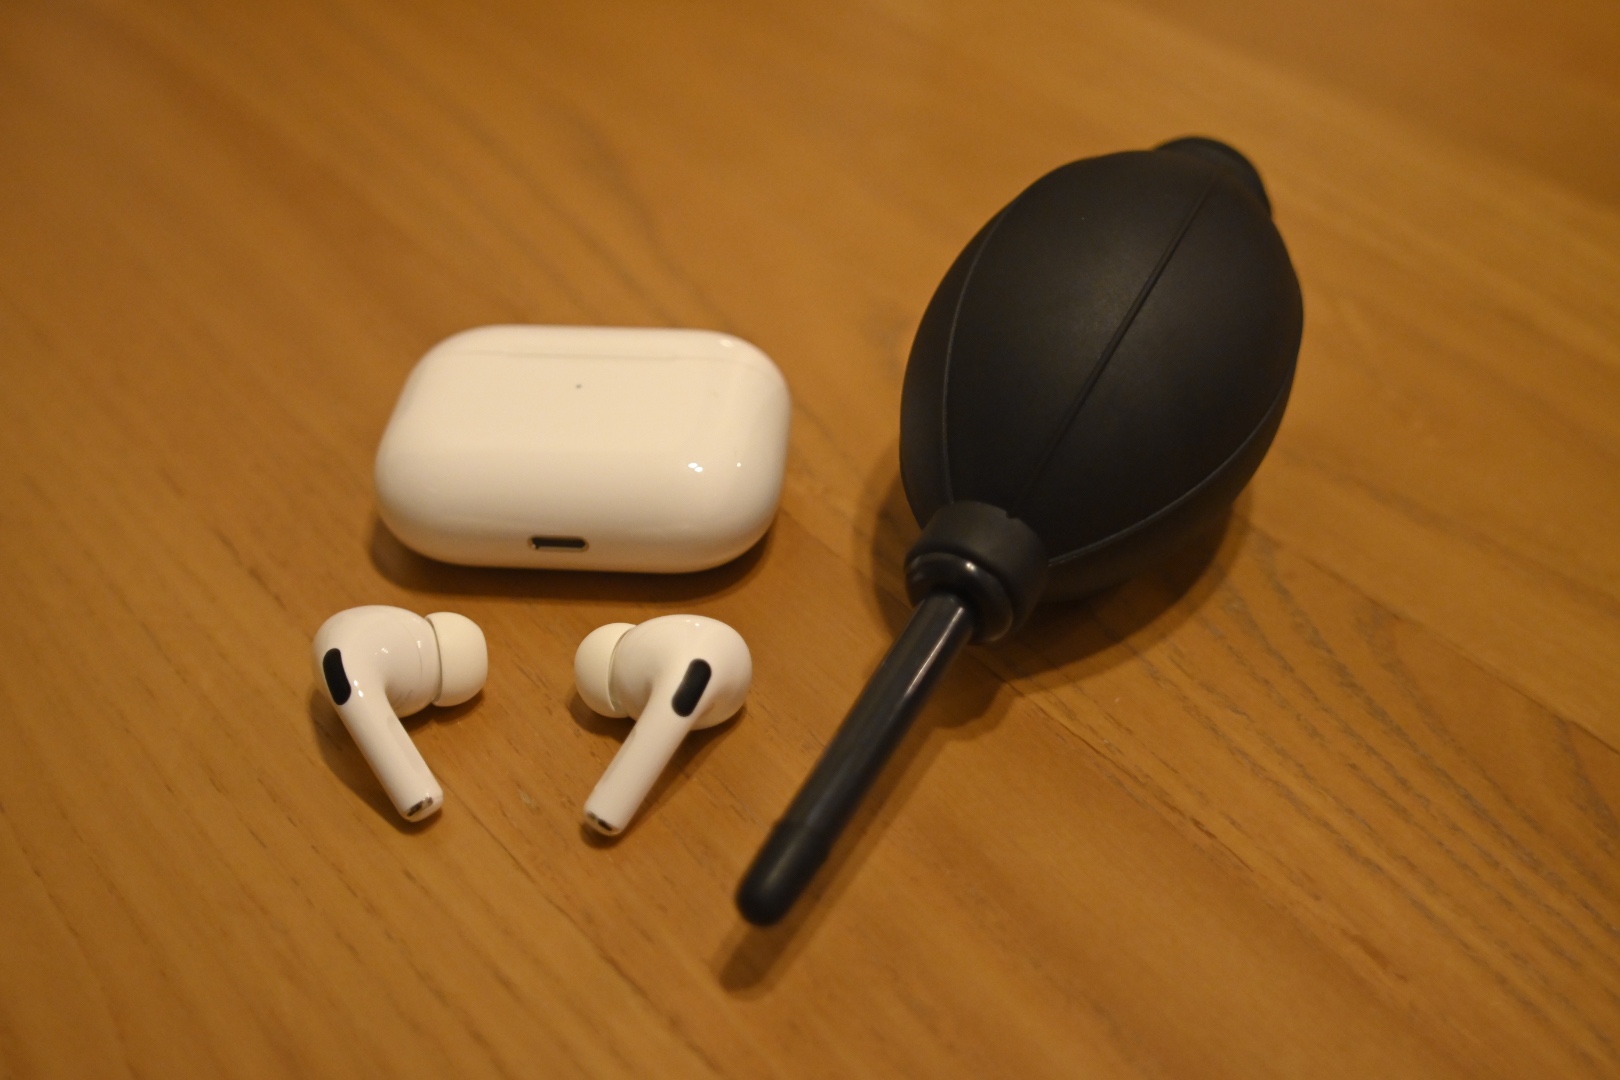 Airpods-pro-cleaning-blog-short-text-miscellaneous-notes-1